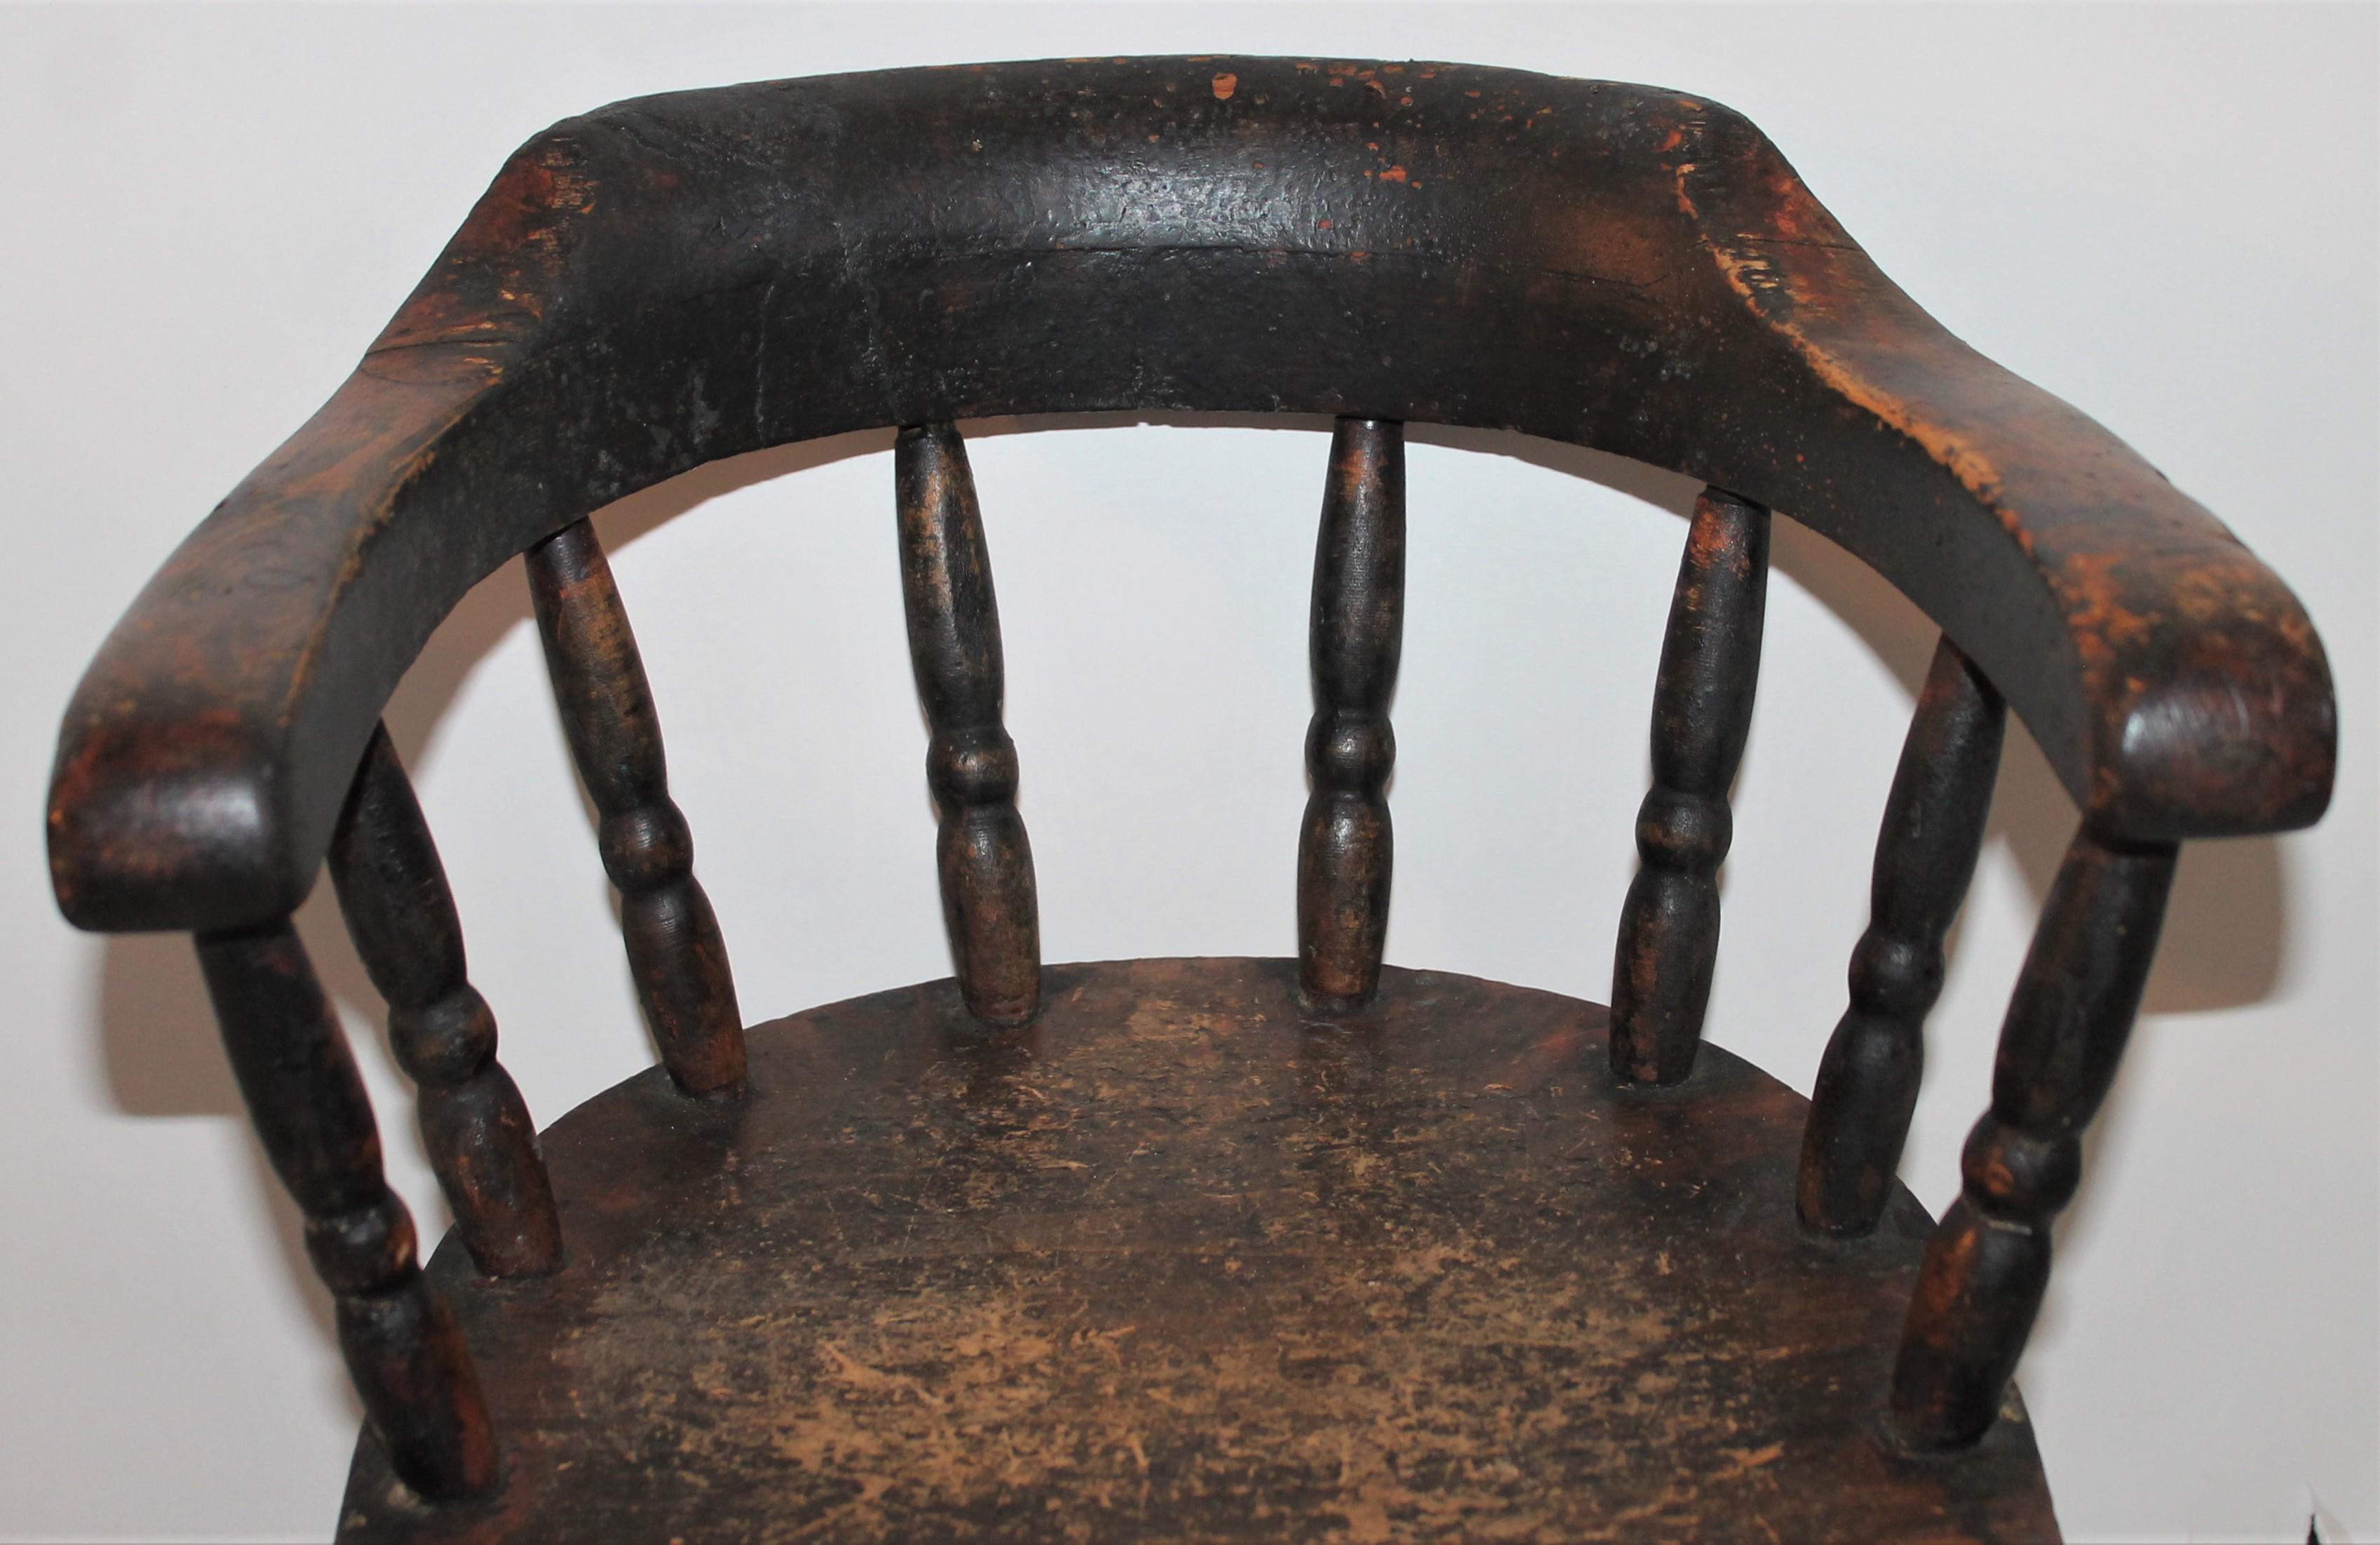 This fine mid western Child's captain’s chair in original painted surface is in great condition. Fantastic for a teddy bear collection or little child. This chair has wonderful aged wear and nice patina.